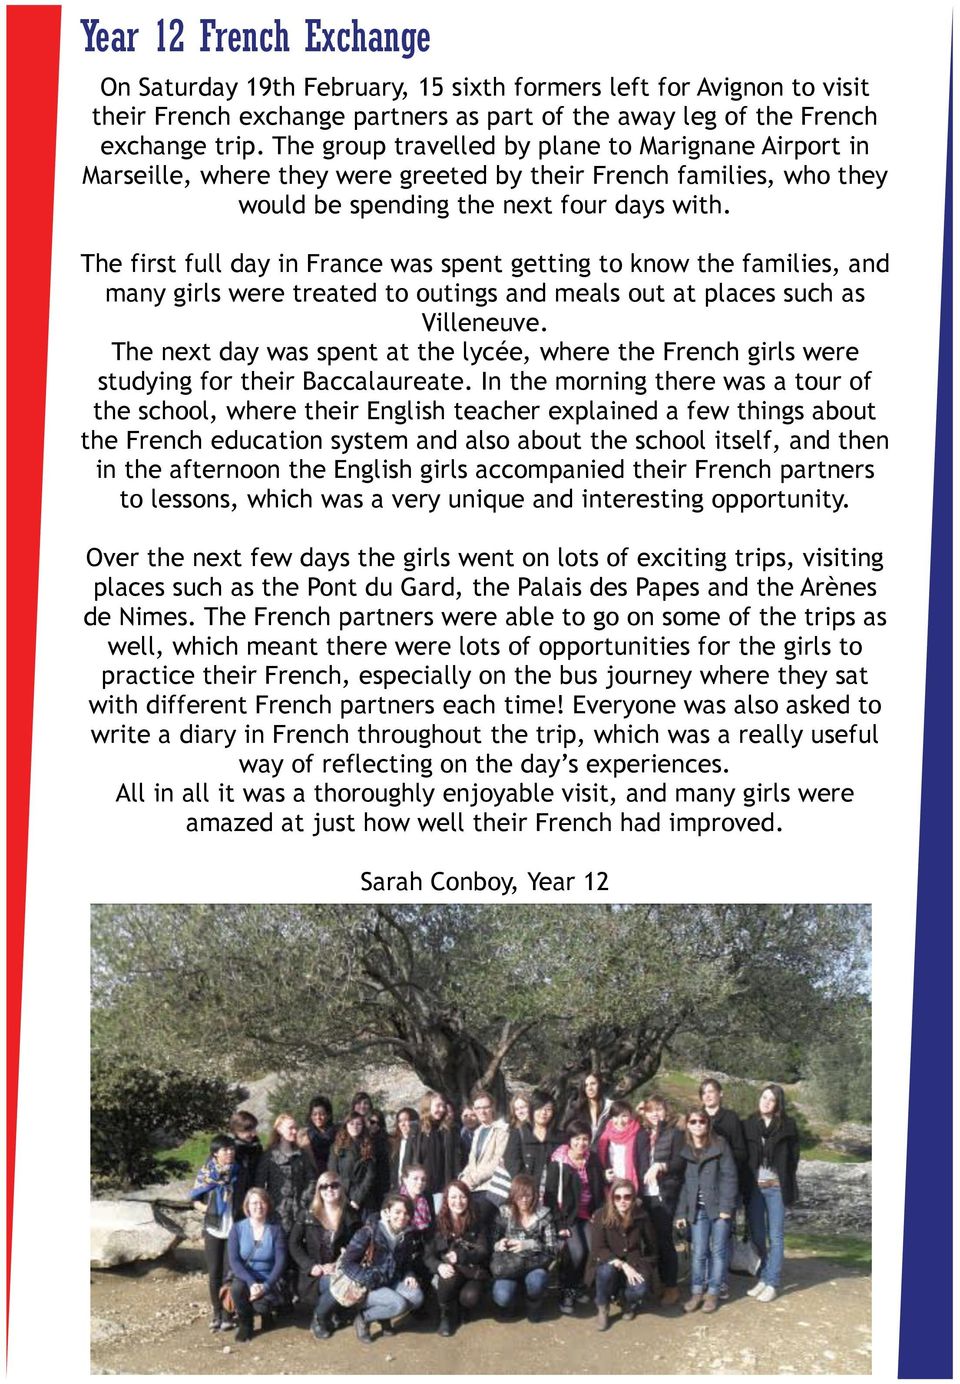 The first full day in France was spent getting to know the families, and many girls were treated to outings and meals out at places such as Villeneuve.